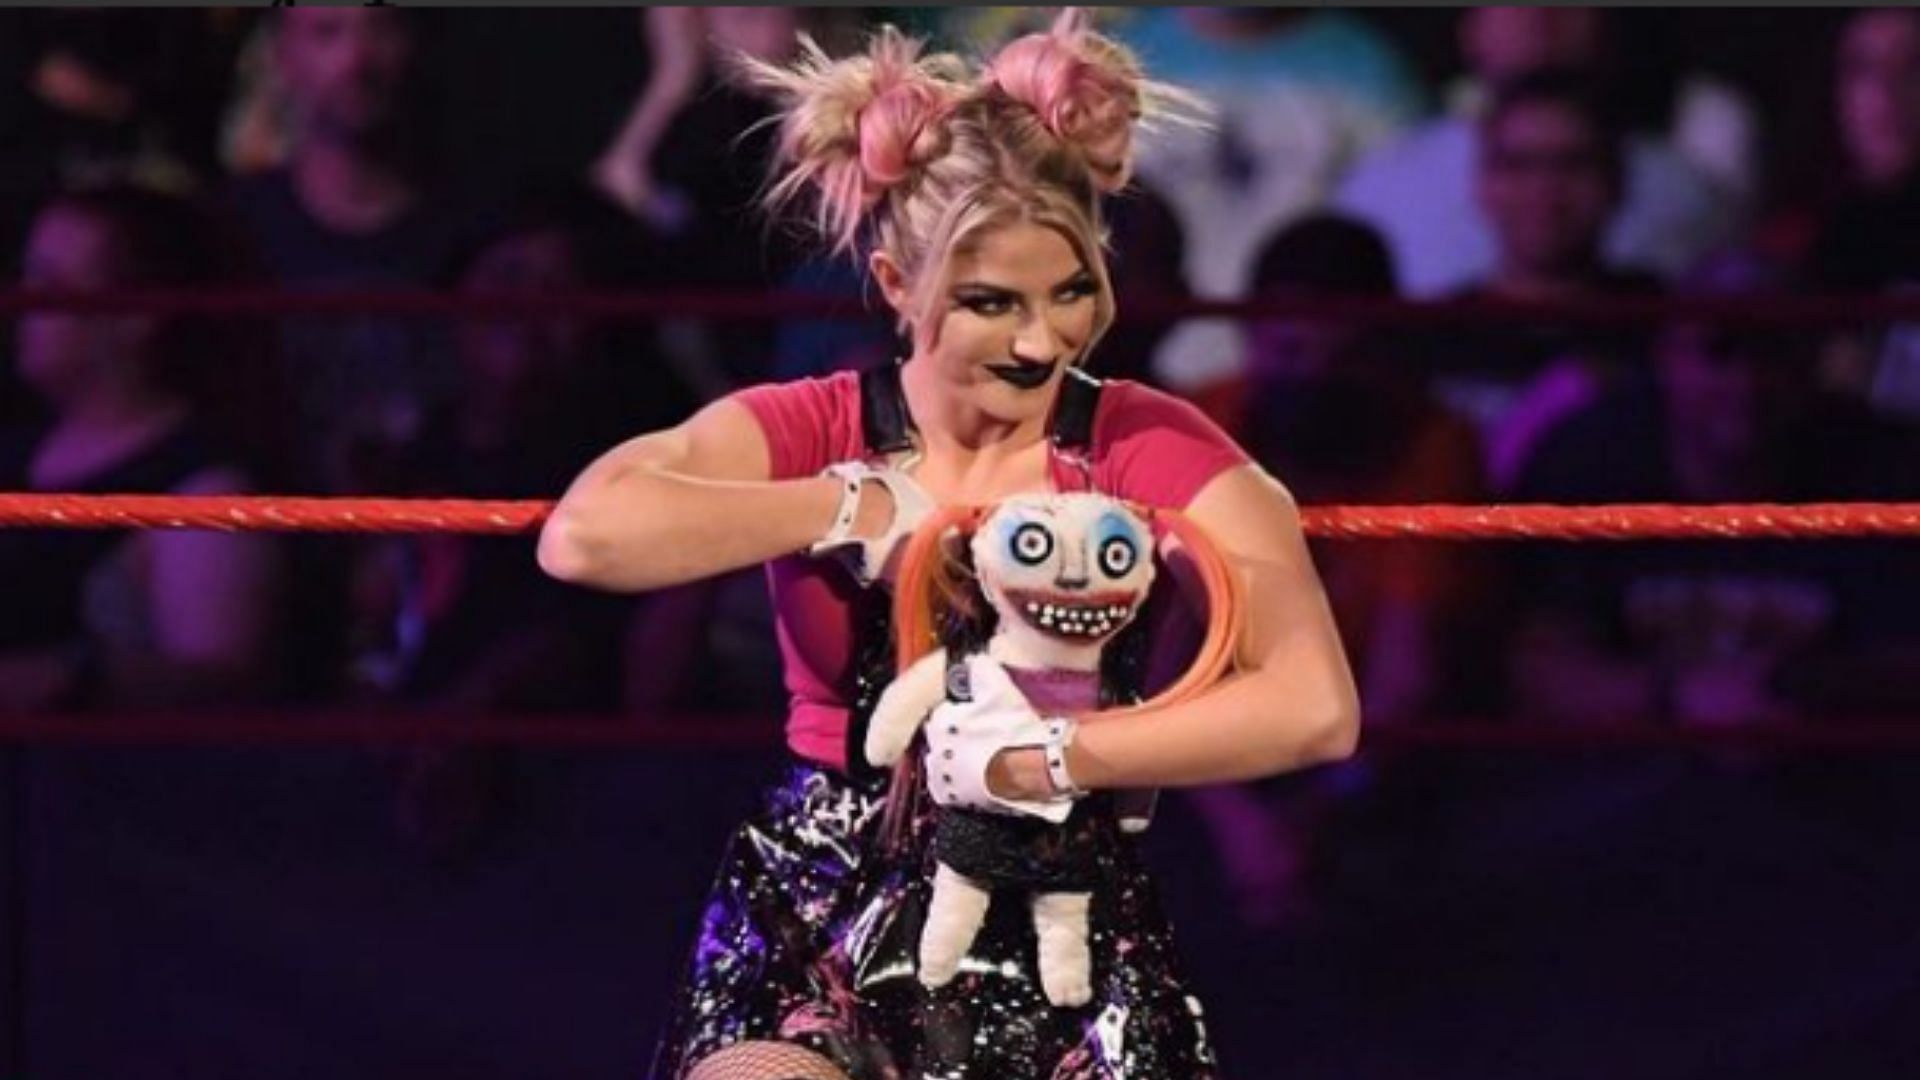 Alexa Bliss is one of WWE&rsquo;s most popular superstars